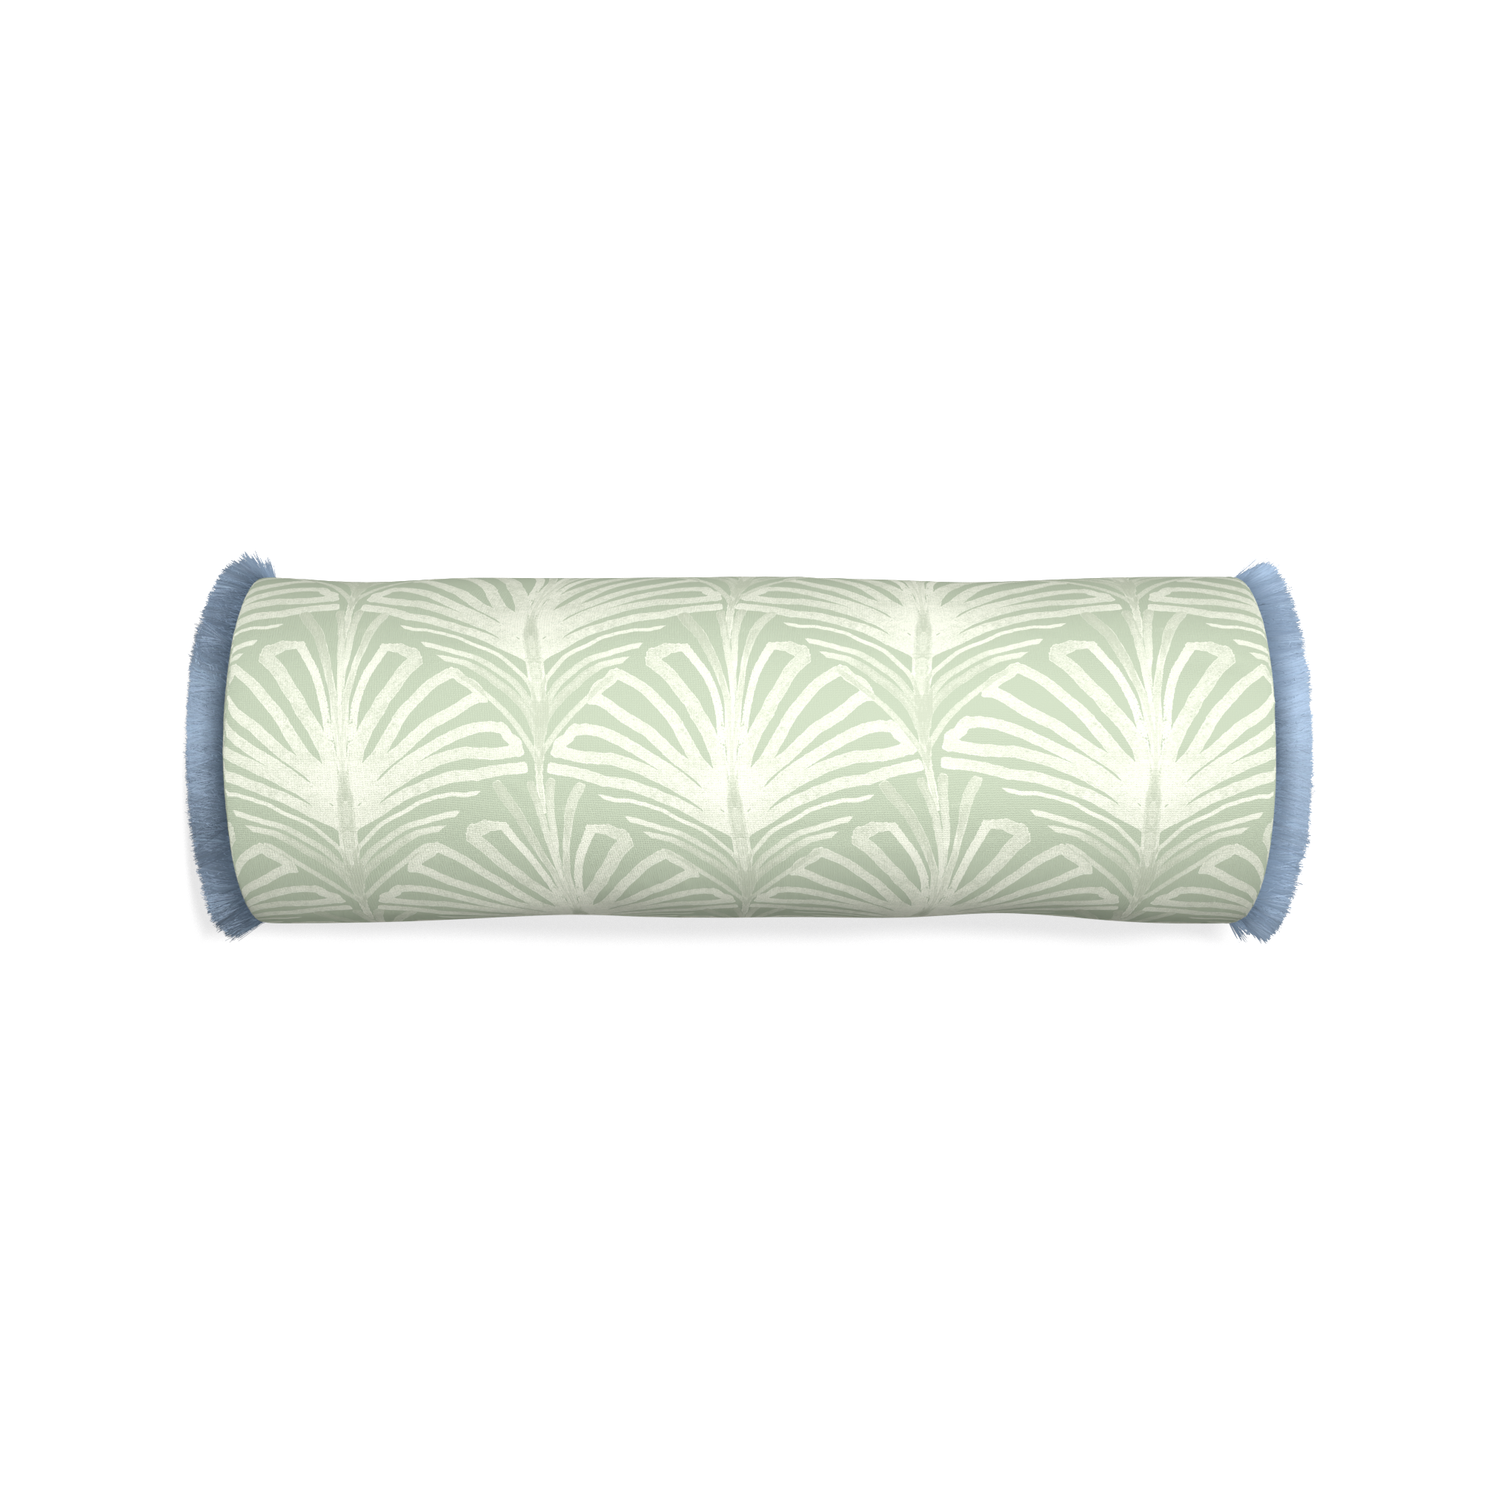 Bolster suzy sage custom sage green palmpillow with sky fringe on white background